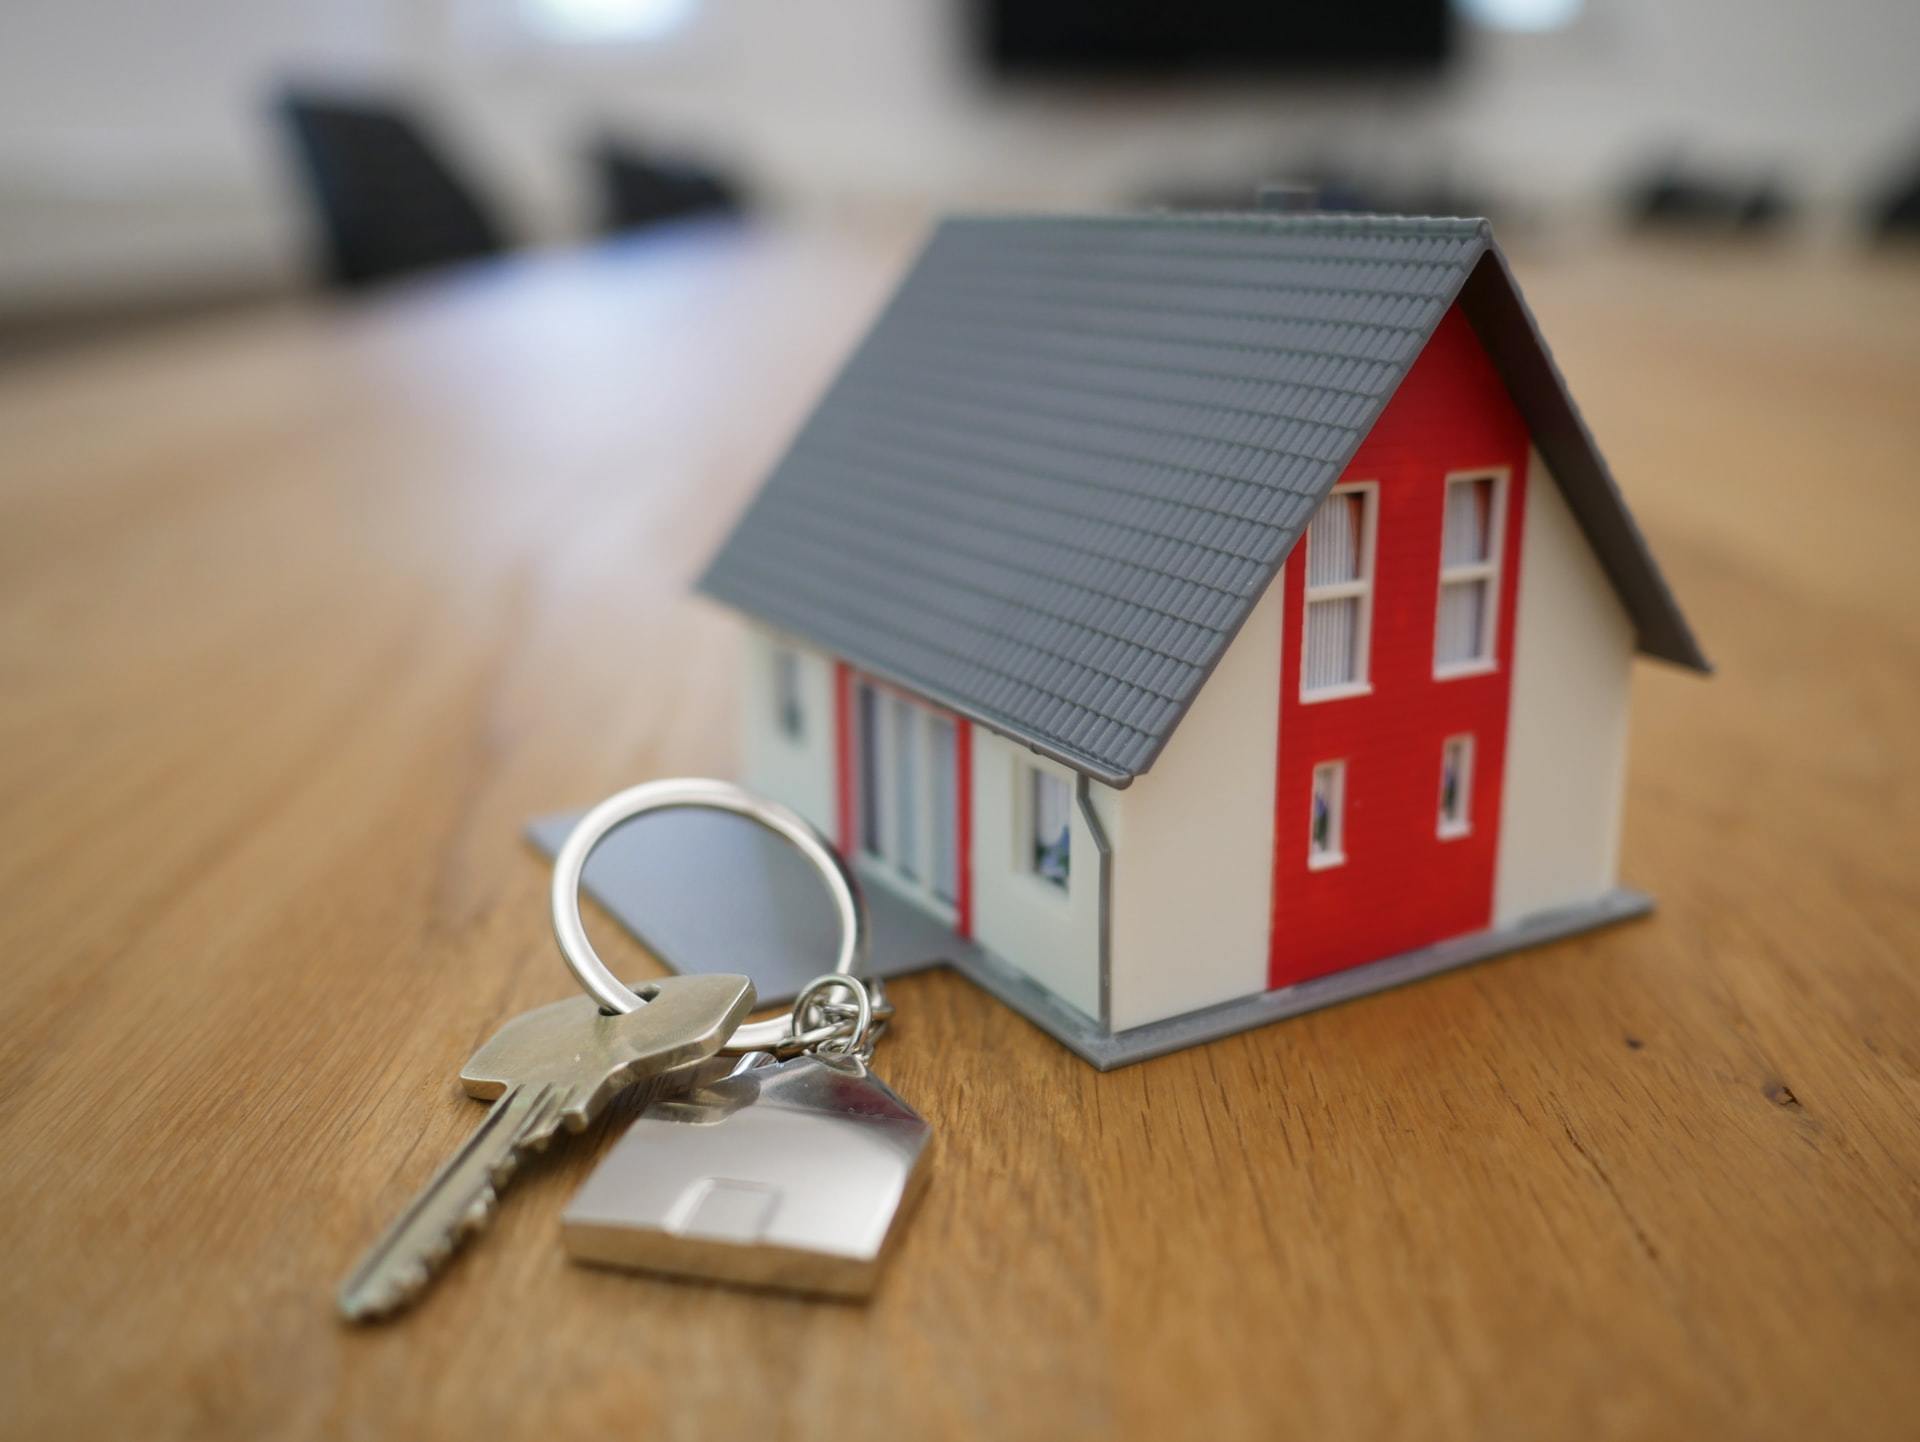 model home keychain on table